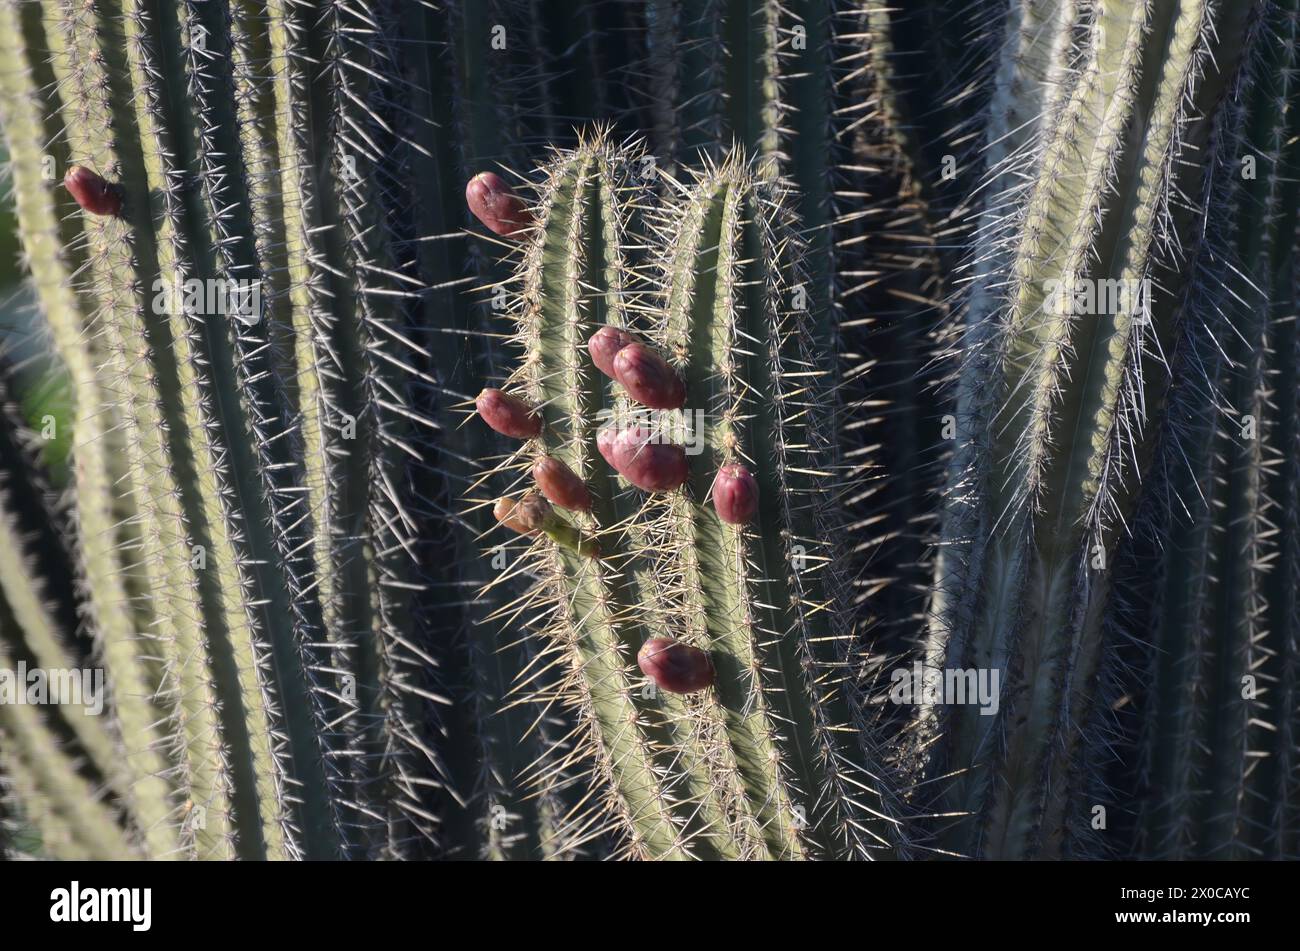 A cactus with many spines and a few flowers. The cactus is in a field with trees in the background Stock Photo